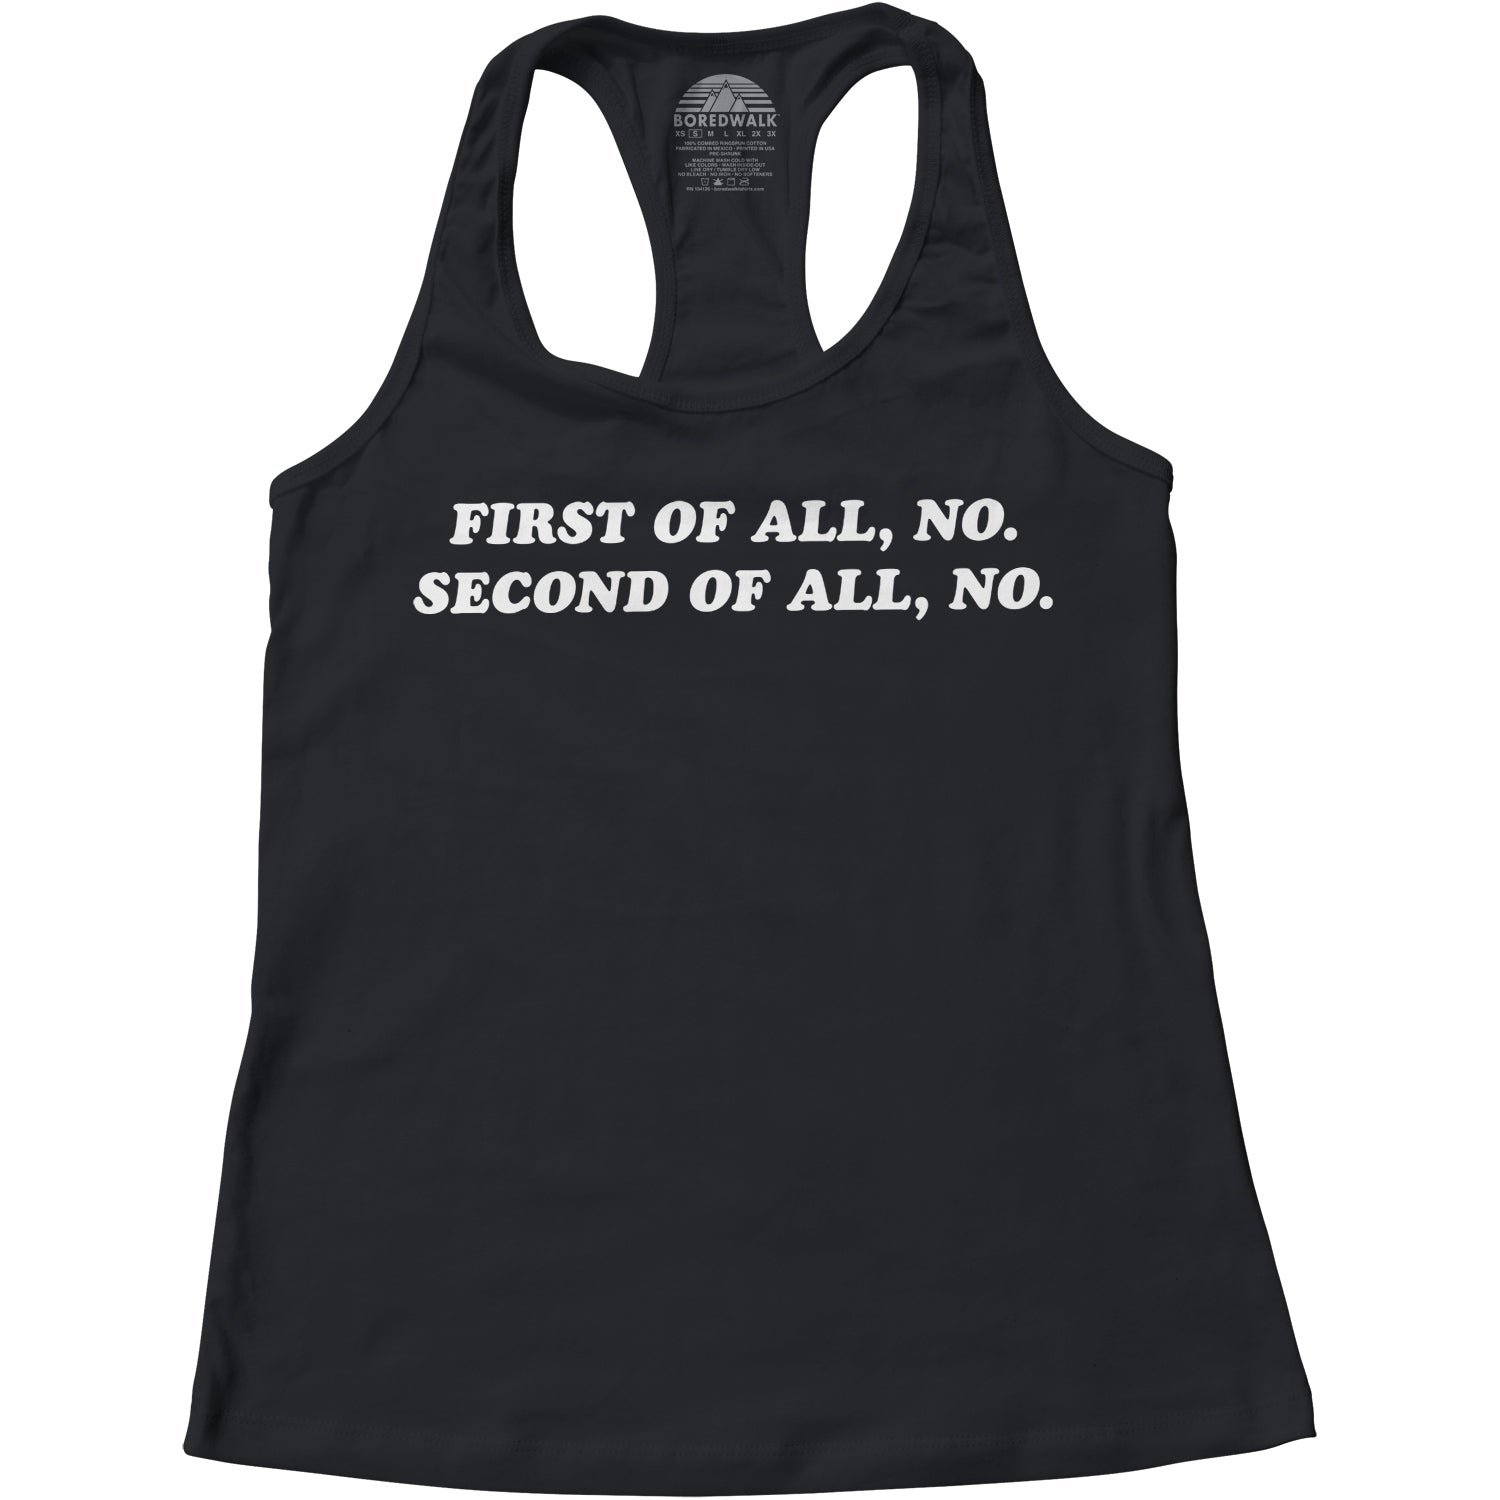 Women's First of All No Second of All No Racerback Tank Top